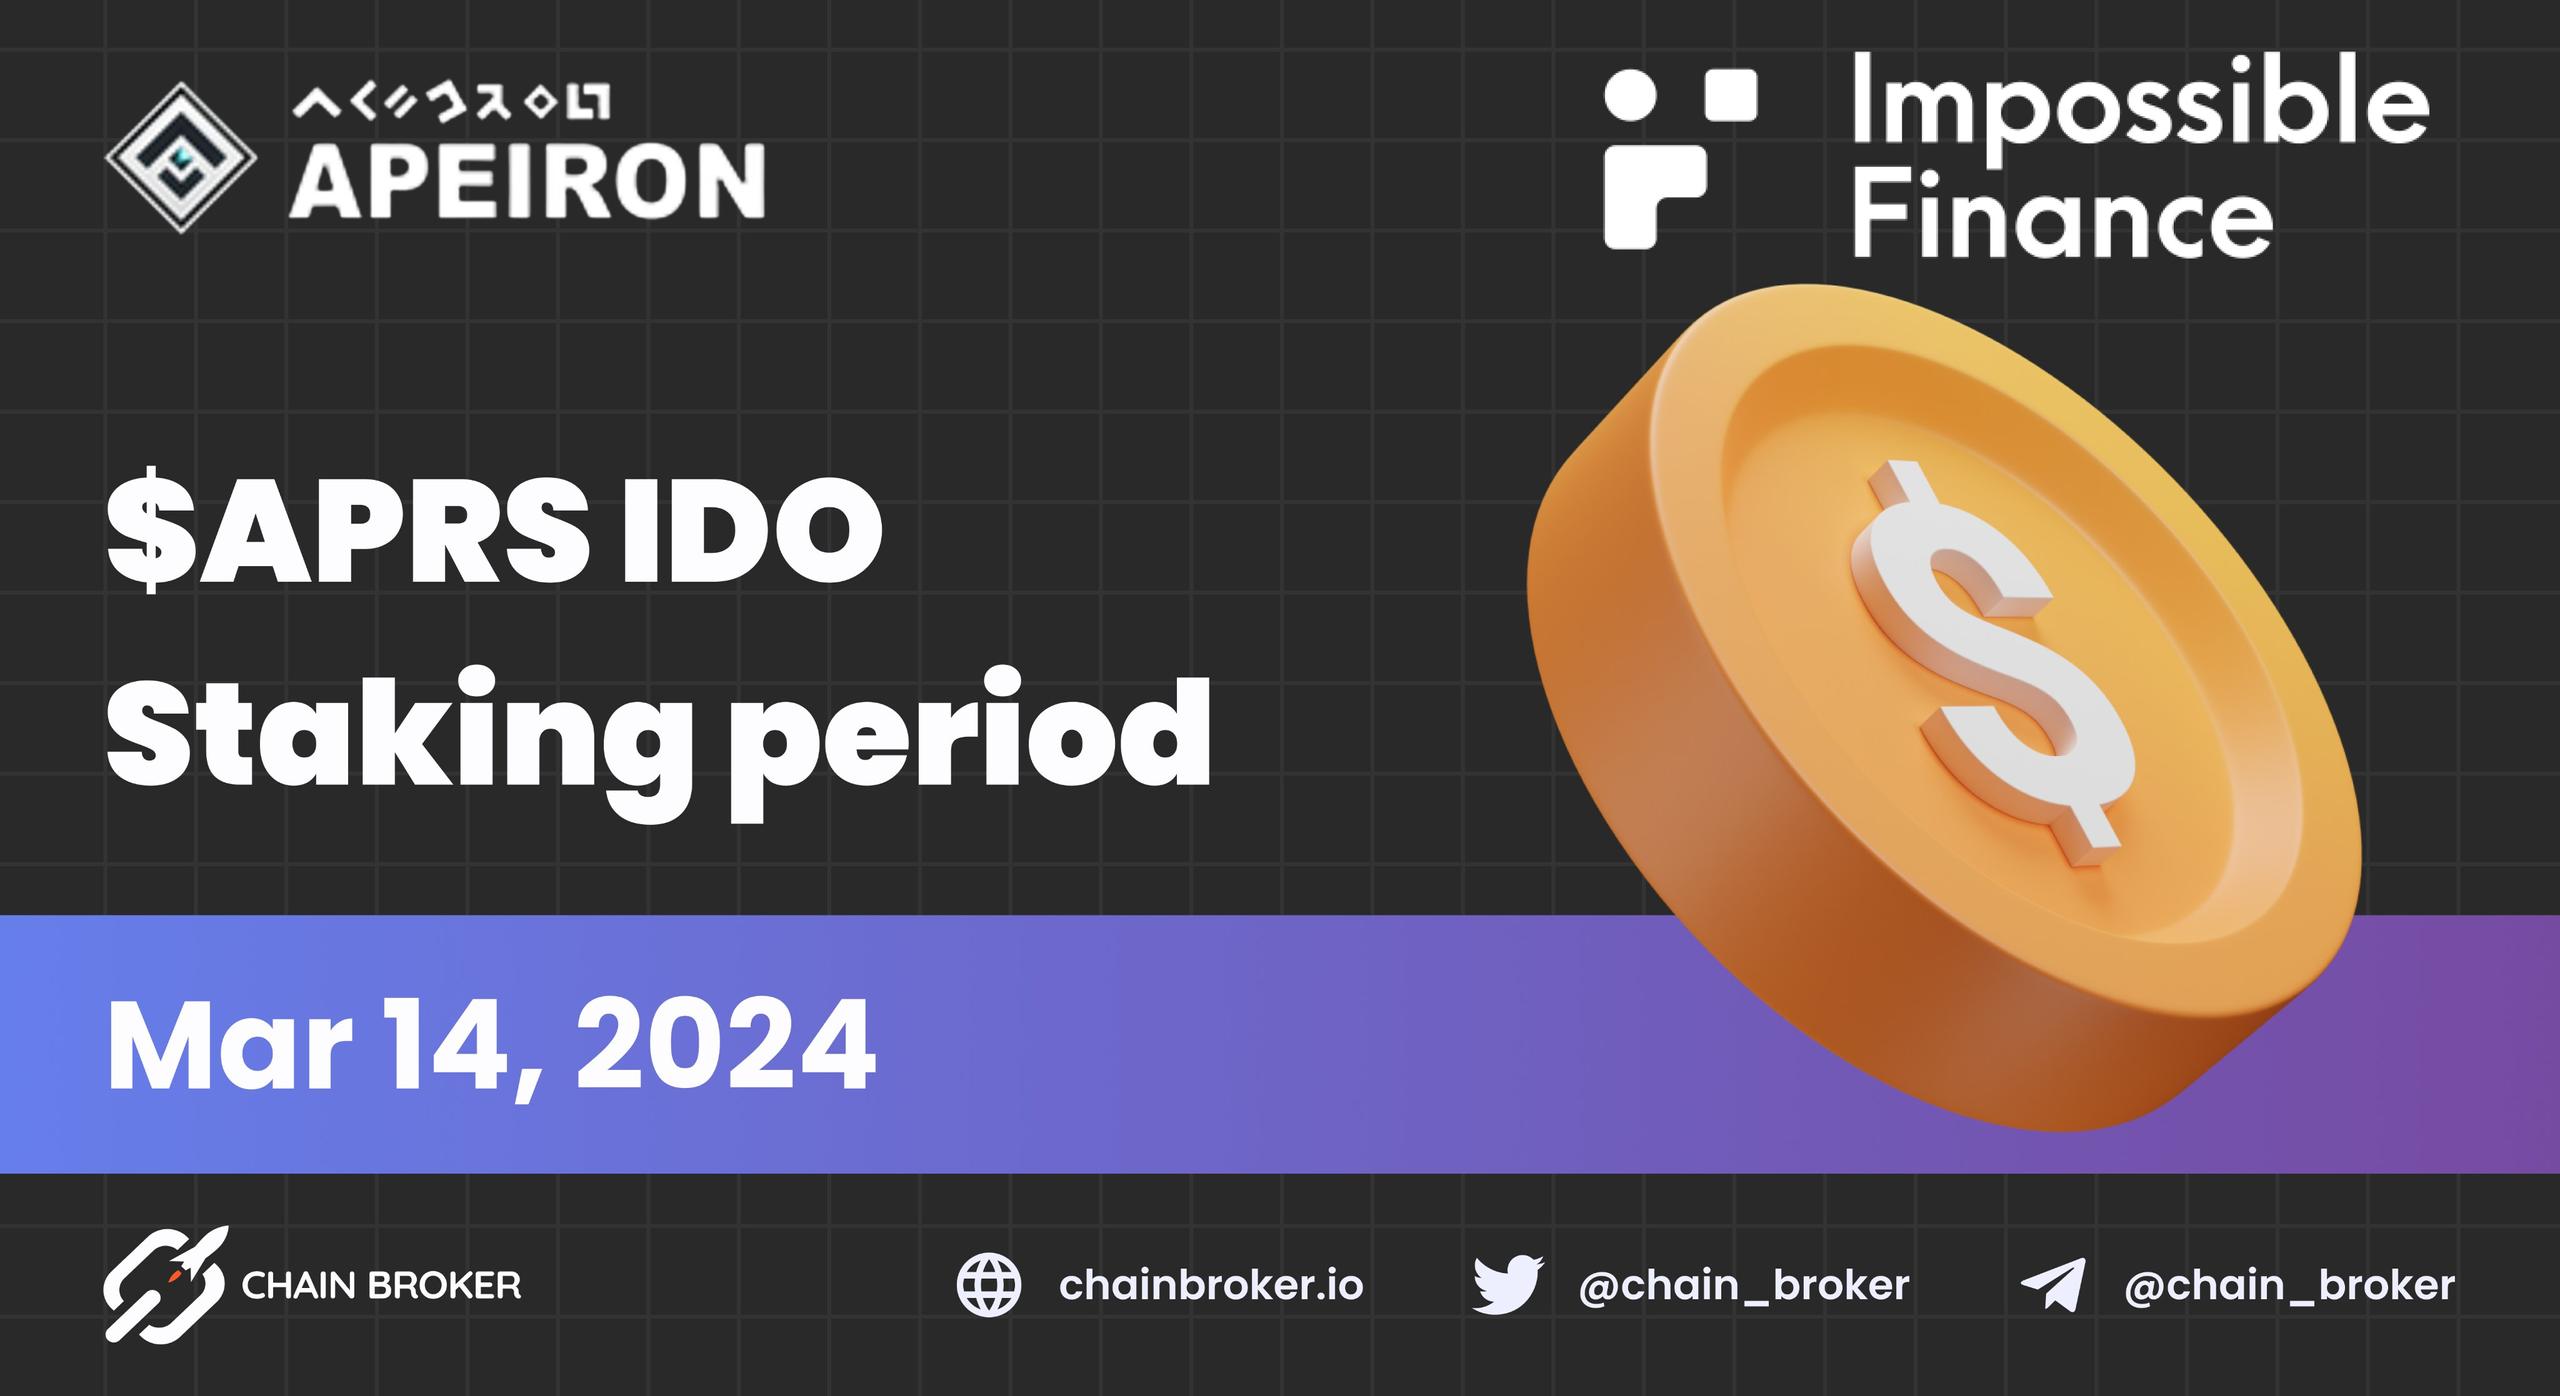 $APRS IDO staking is live on Impossible Finance